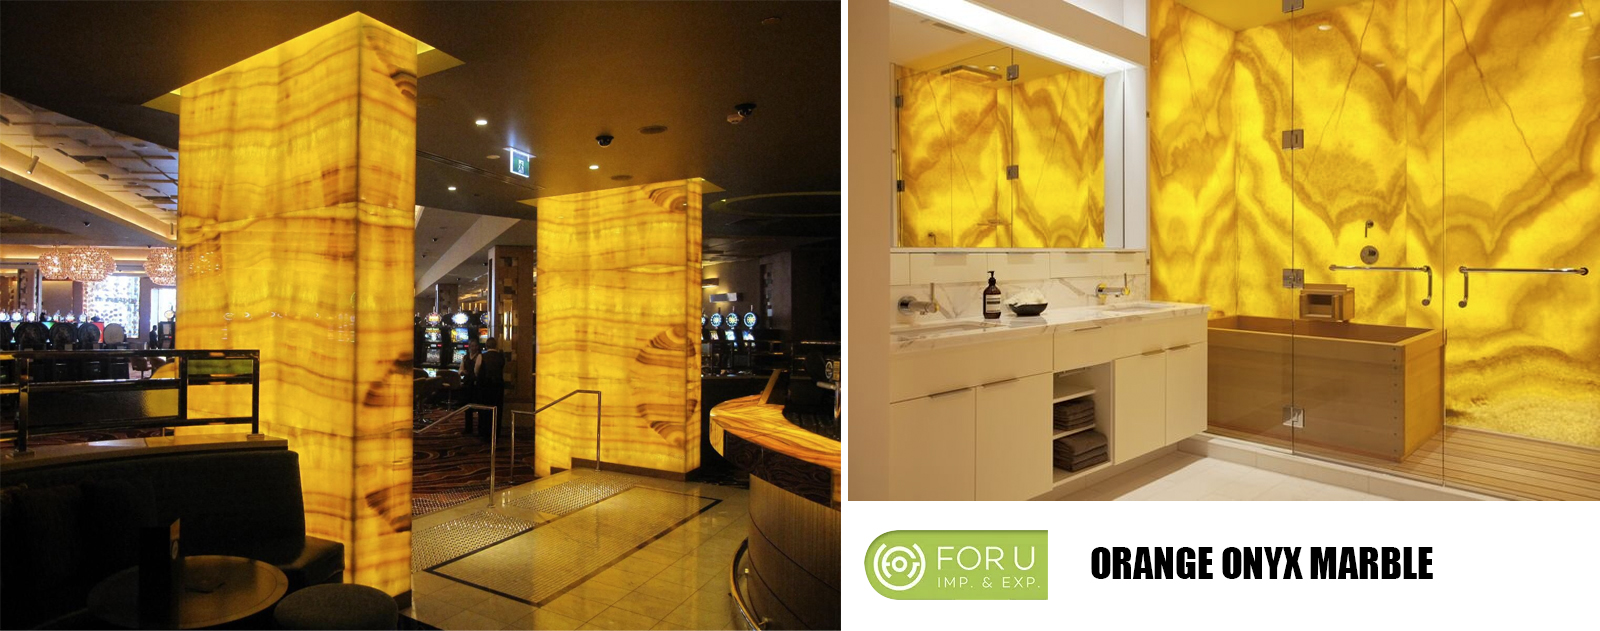 Orange Onyx Marble Backlit Wall Projects FOR U STONE